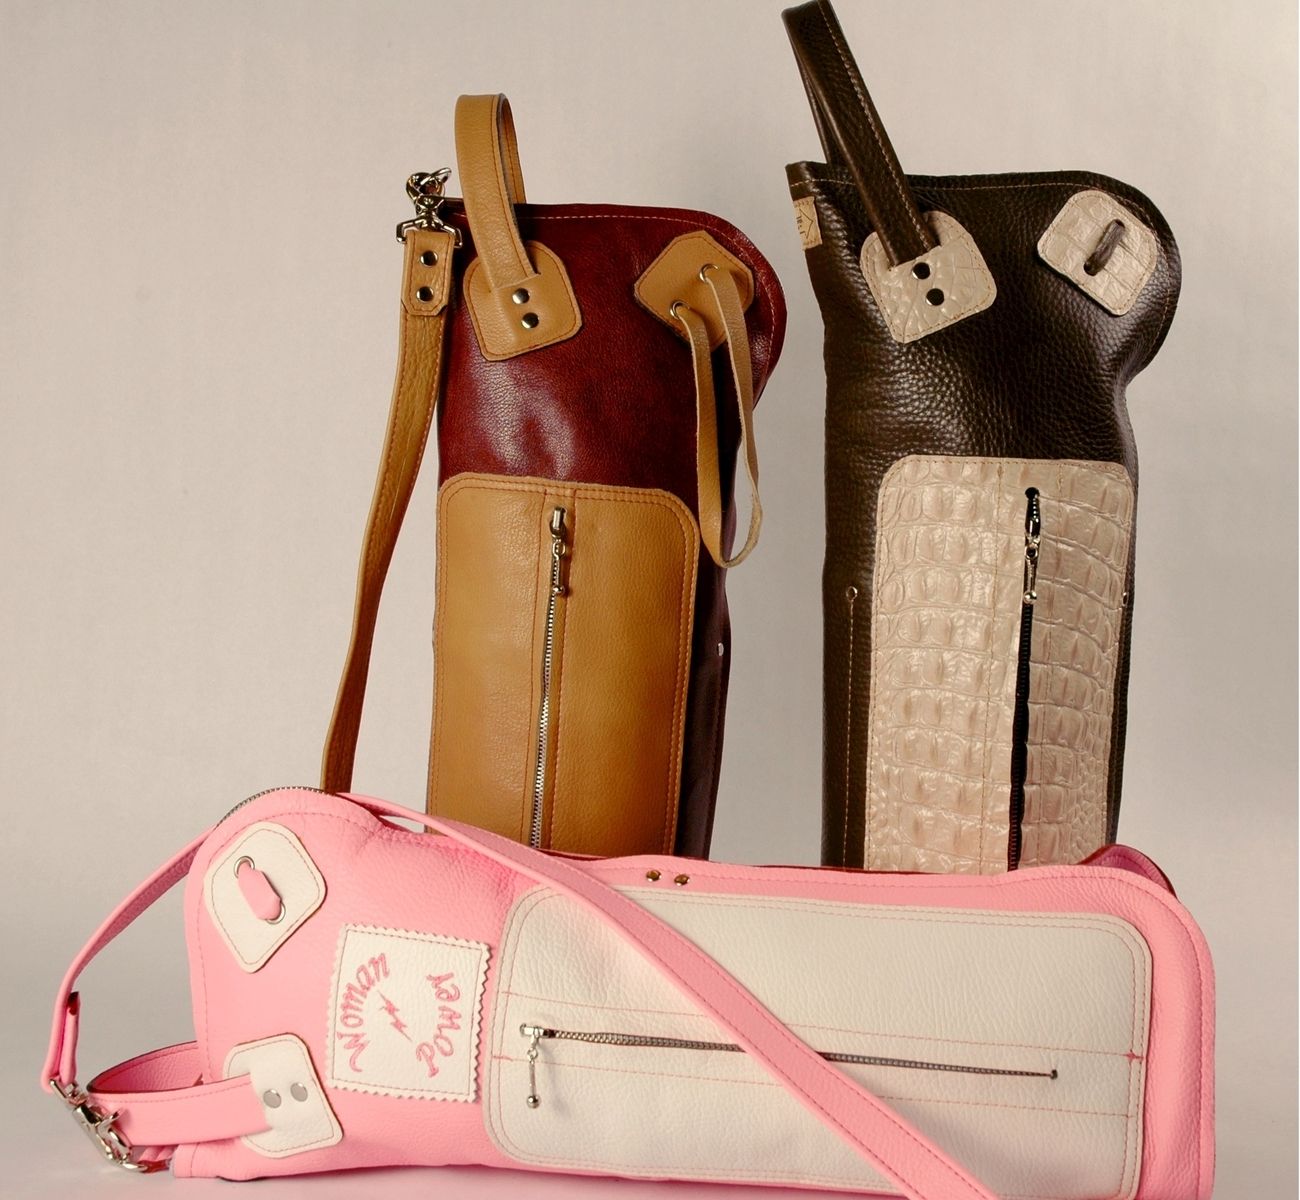 Handmade Custom Made Leather Drumstick Bags by Dallas Designing Dreams | www.lvbagssale.com